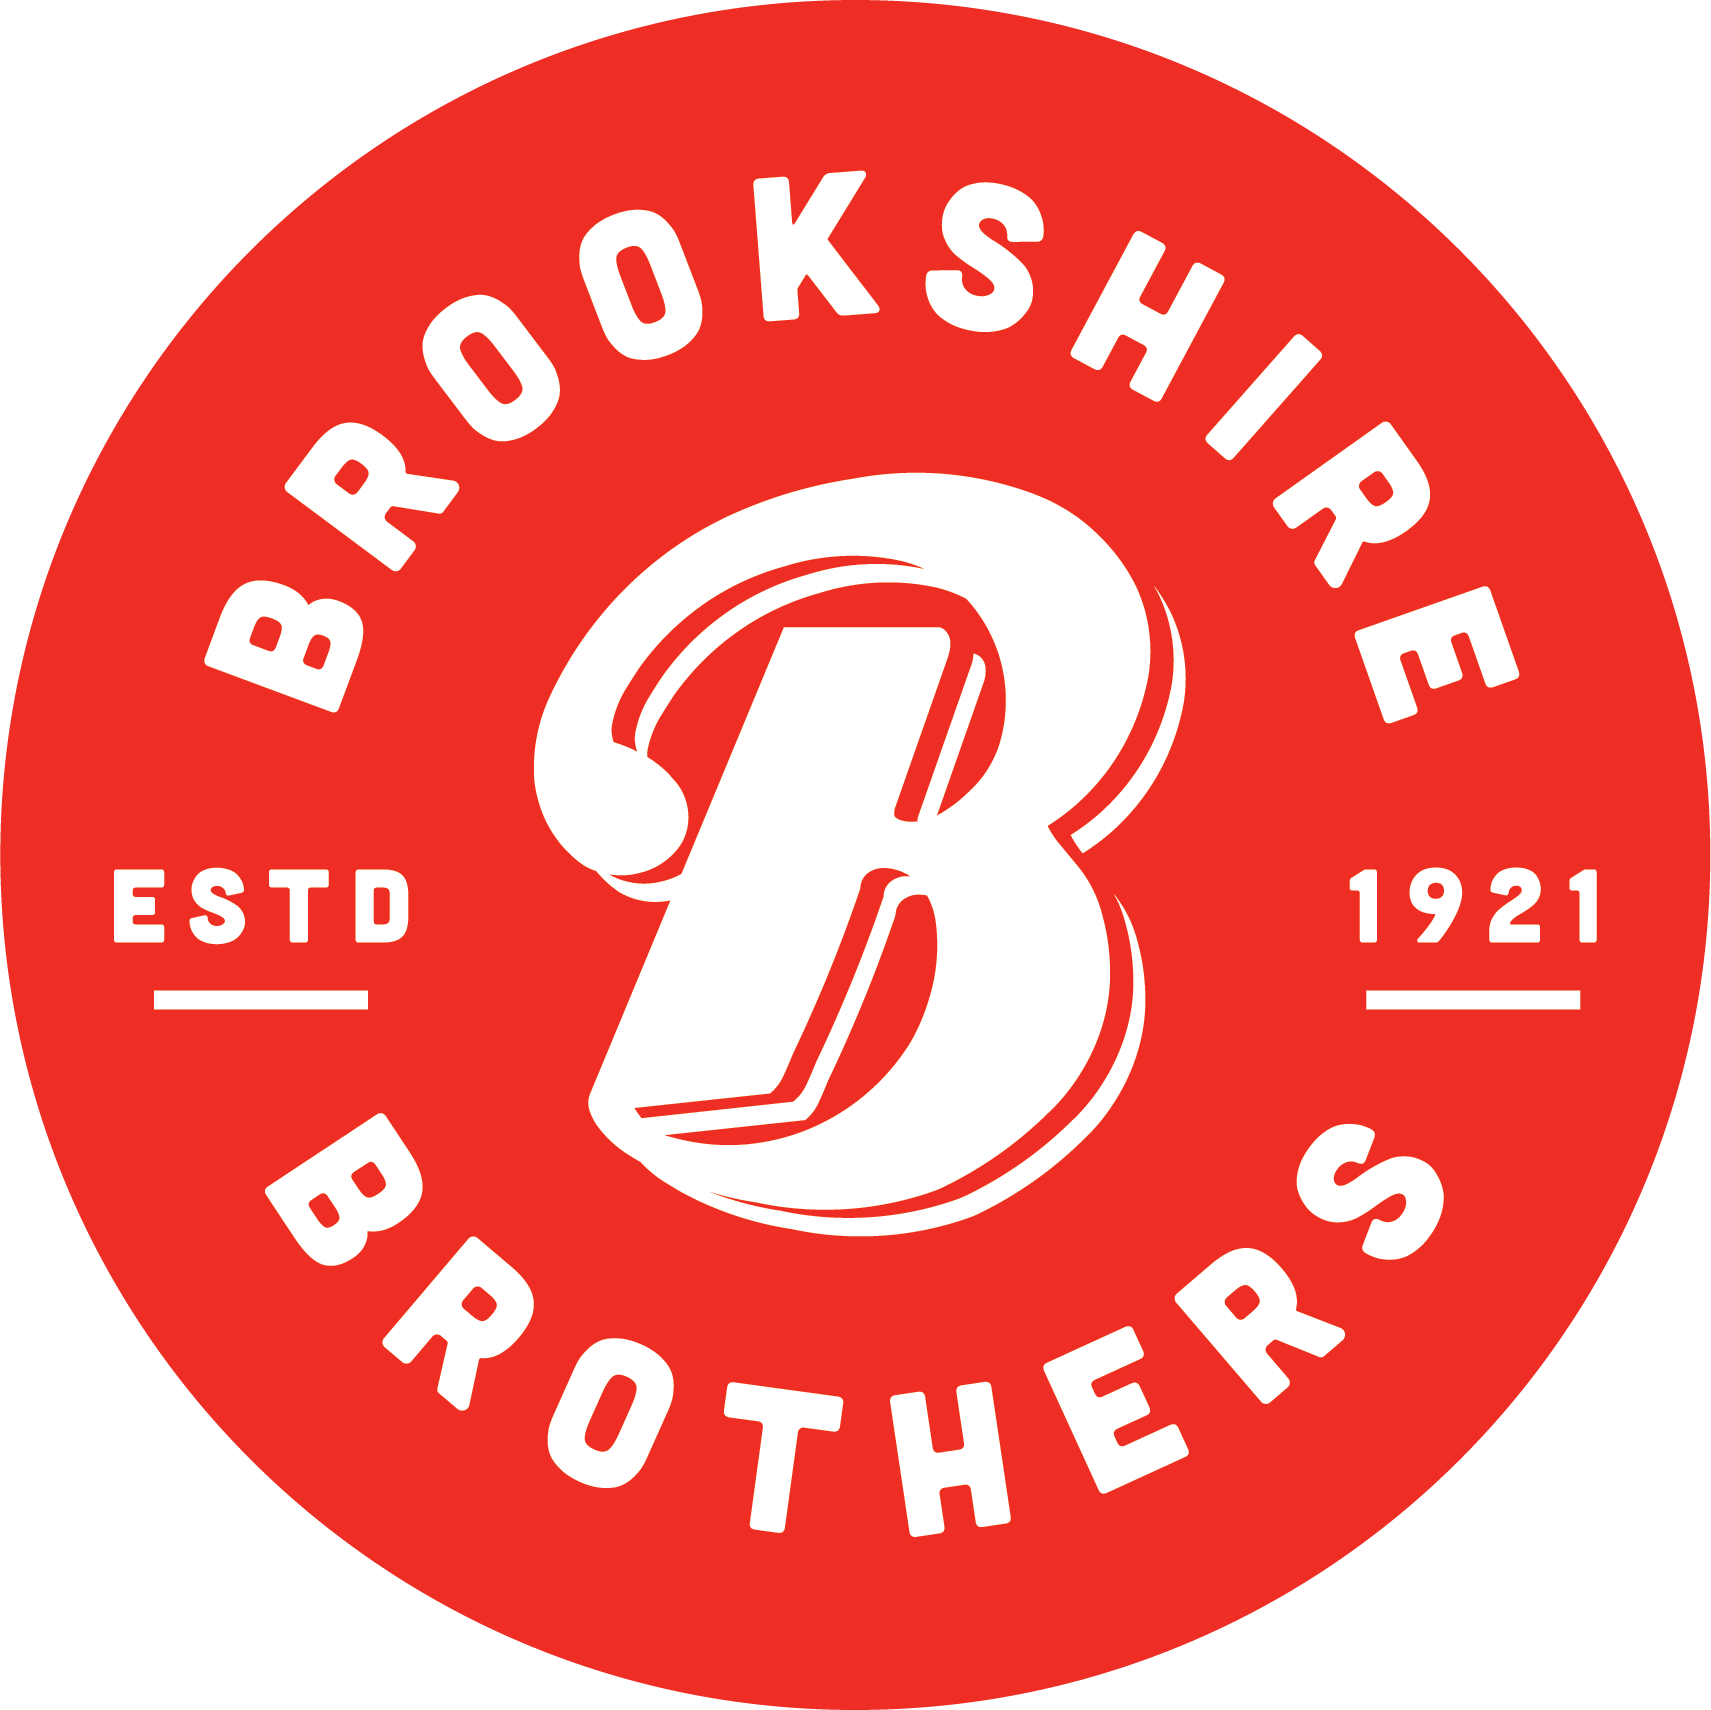 100 Years of Brookshire Brothers